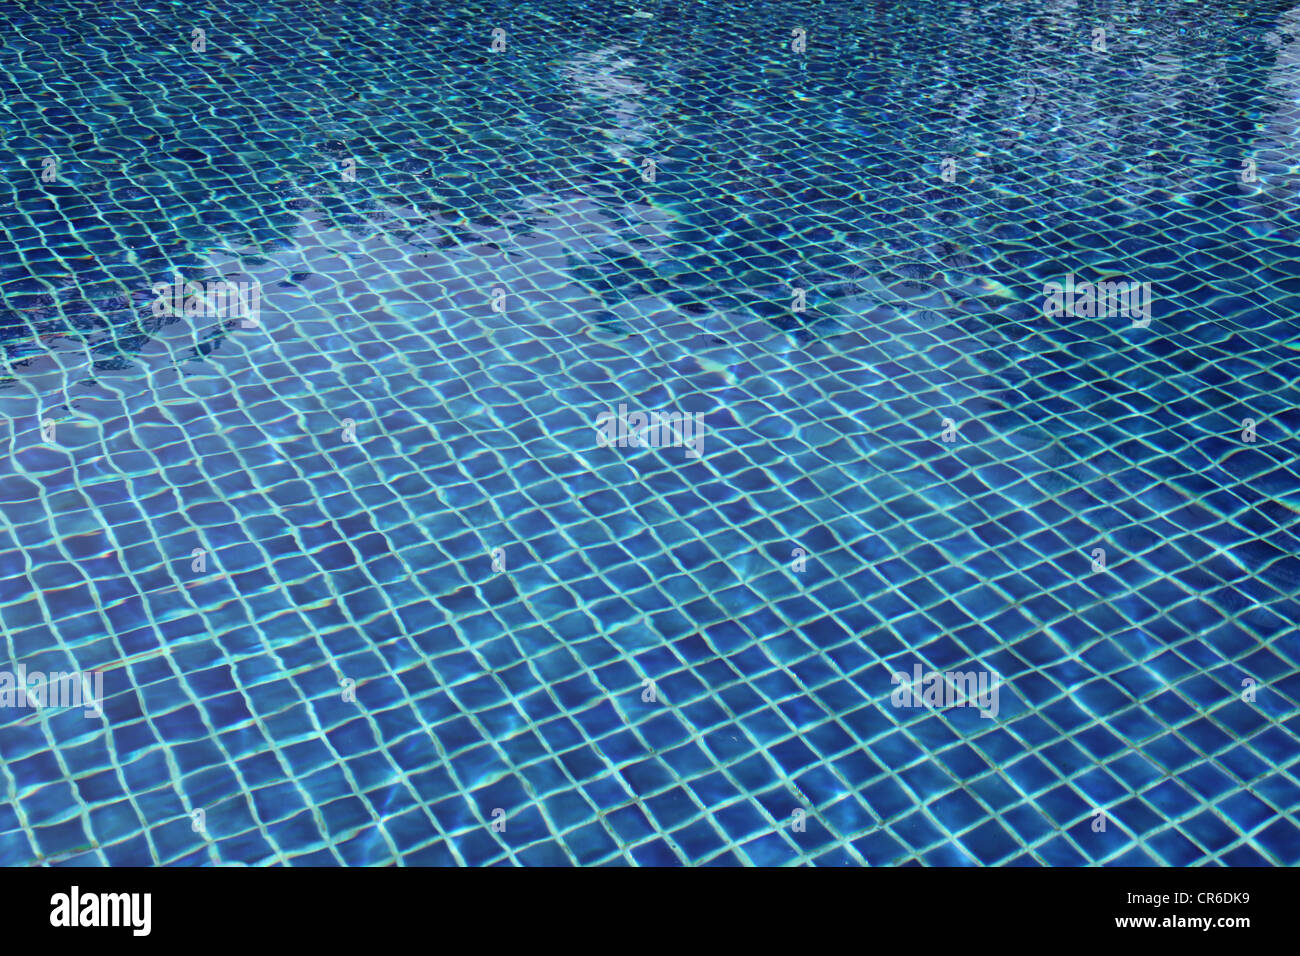 It's a photo of the water of a swimming pool with the blue tiles at the bottom of the pool. It's sunny and fresh visuals. day Stock Photo